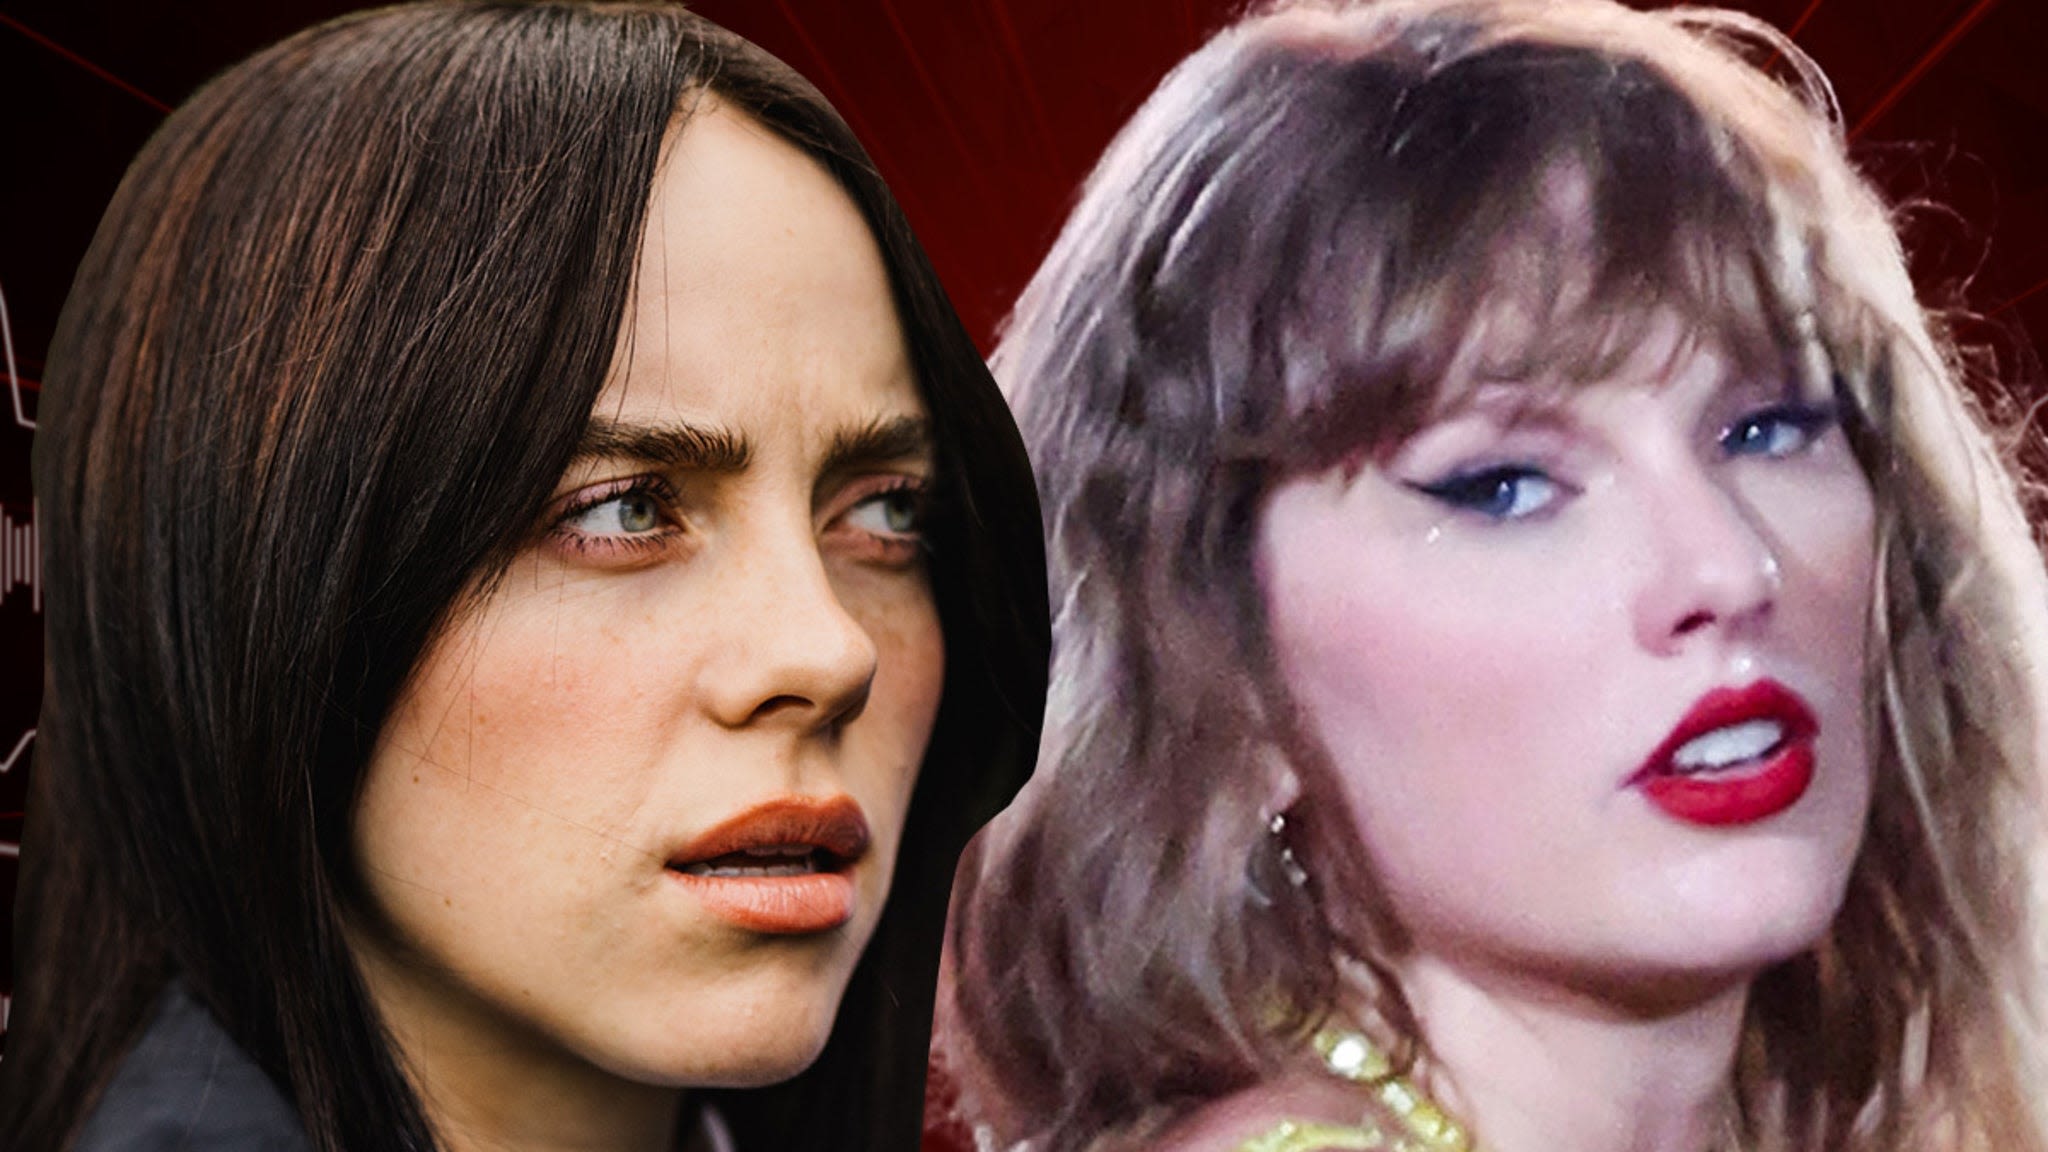 Billie Eilish Appears to Shade Taylor Swift, Calls 3 Hour Concerts 'Psychotic'